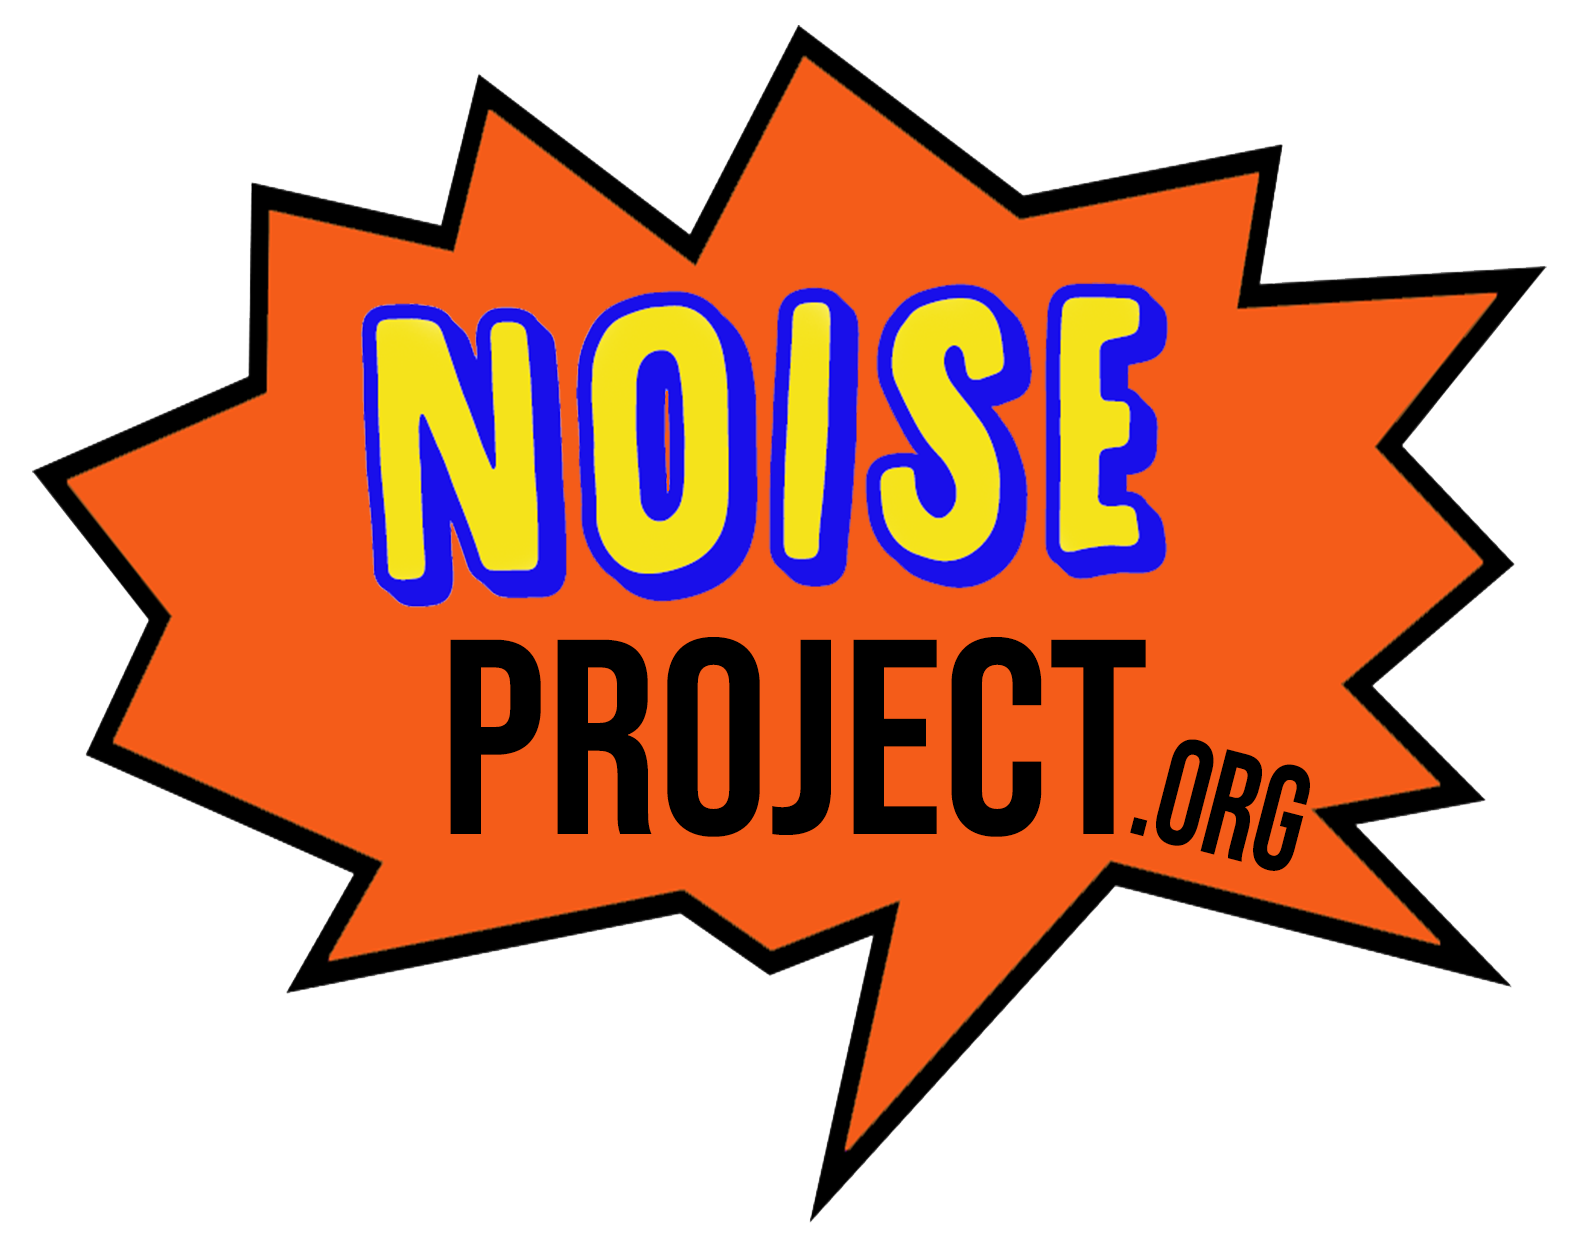 Noise Project dot Org